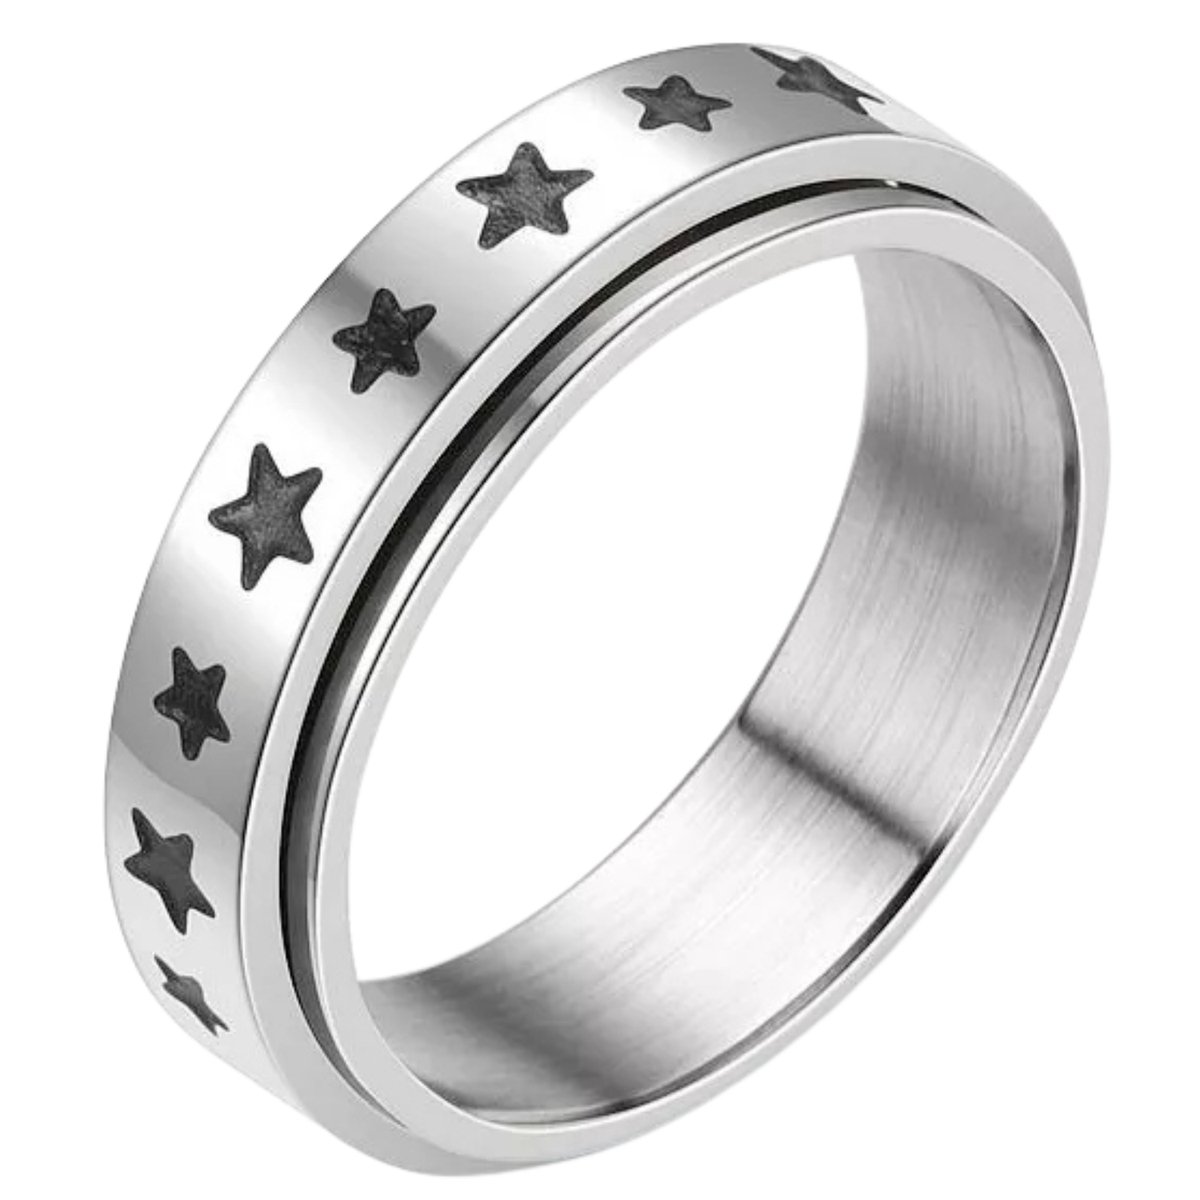 Anxiety Ring - (Sterretjes) - Stress Ring - Fidget Ring - Draaibare Ring - Spinning Ring - Spinner Ring - Zilver Plated - (20.75 mm / maat 65)